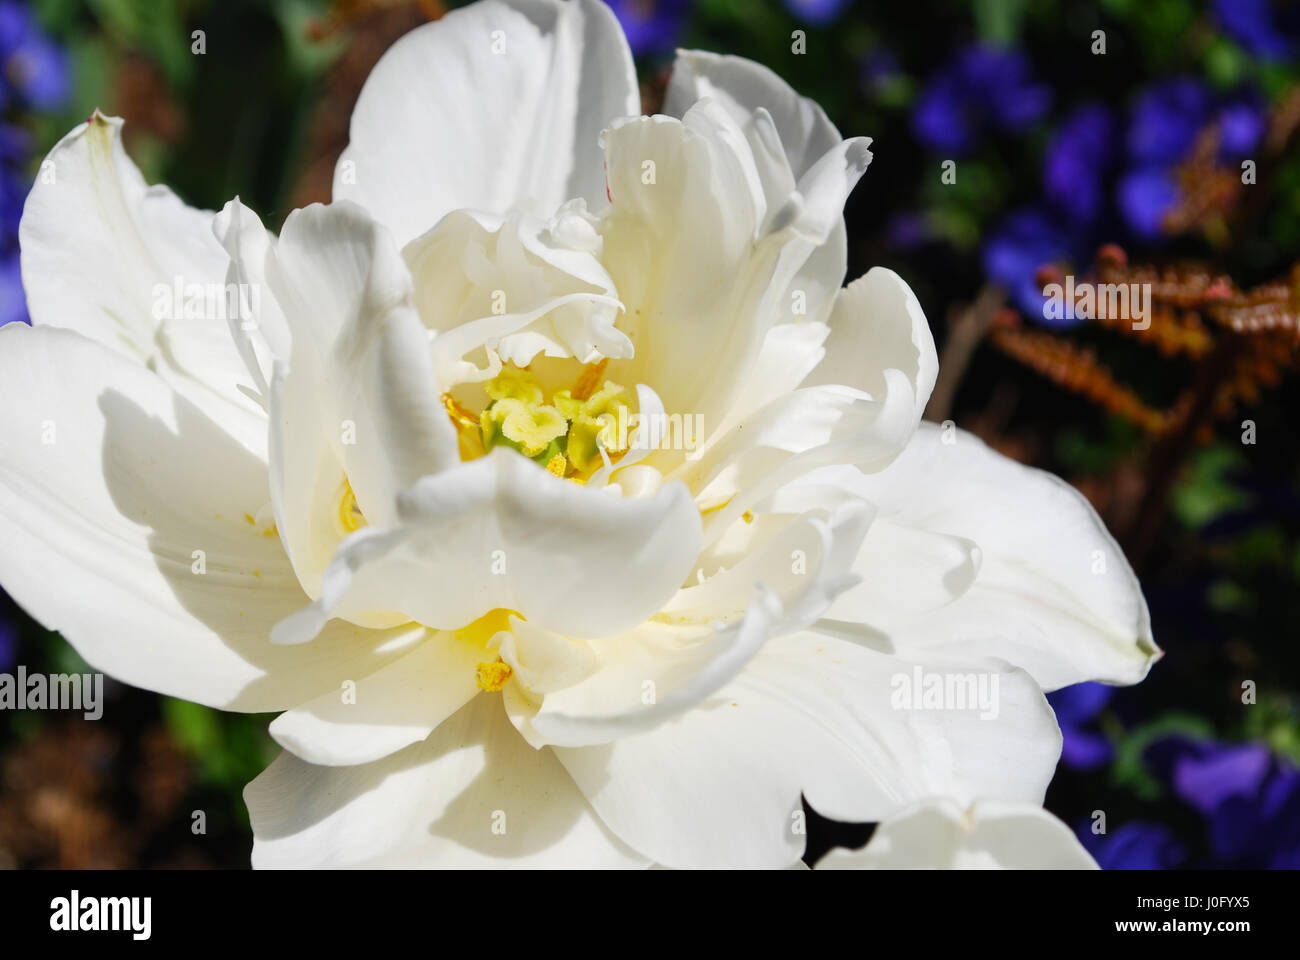 A White Double Blooming Tulip Stock Photo